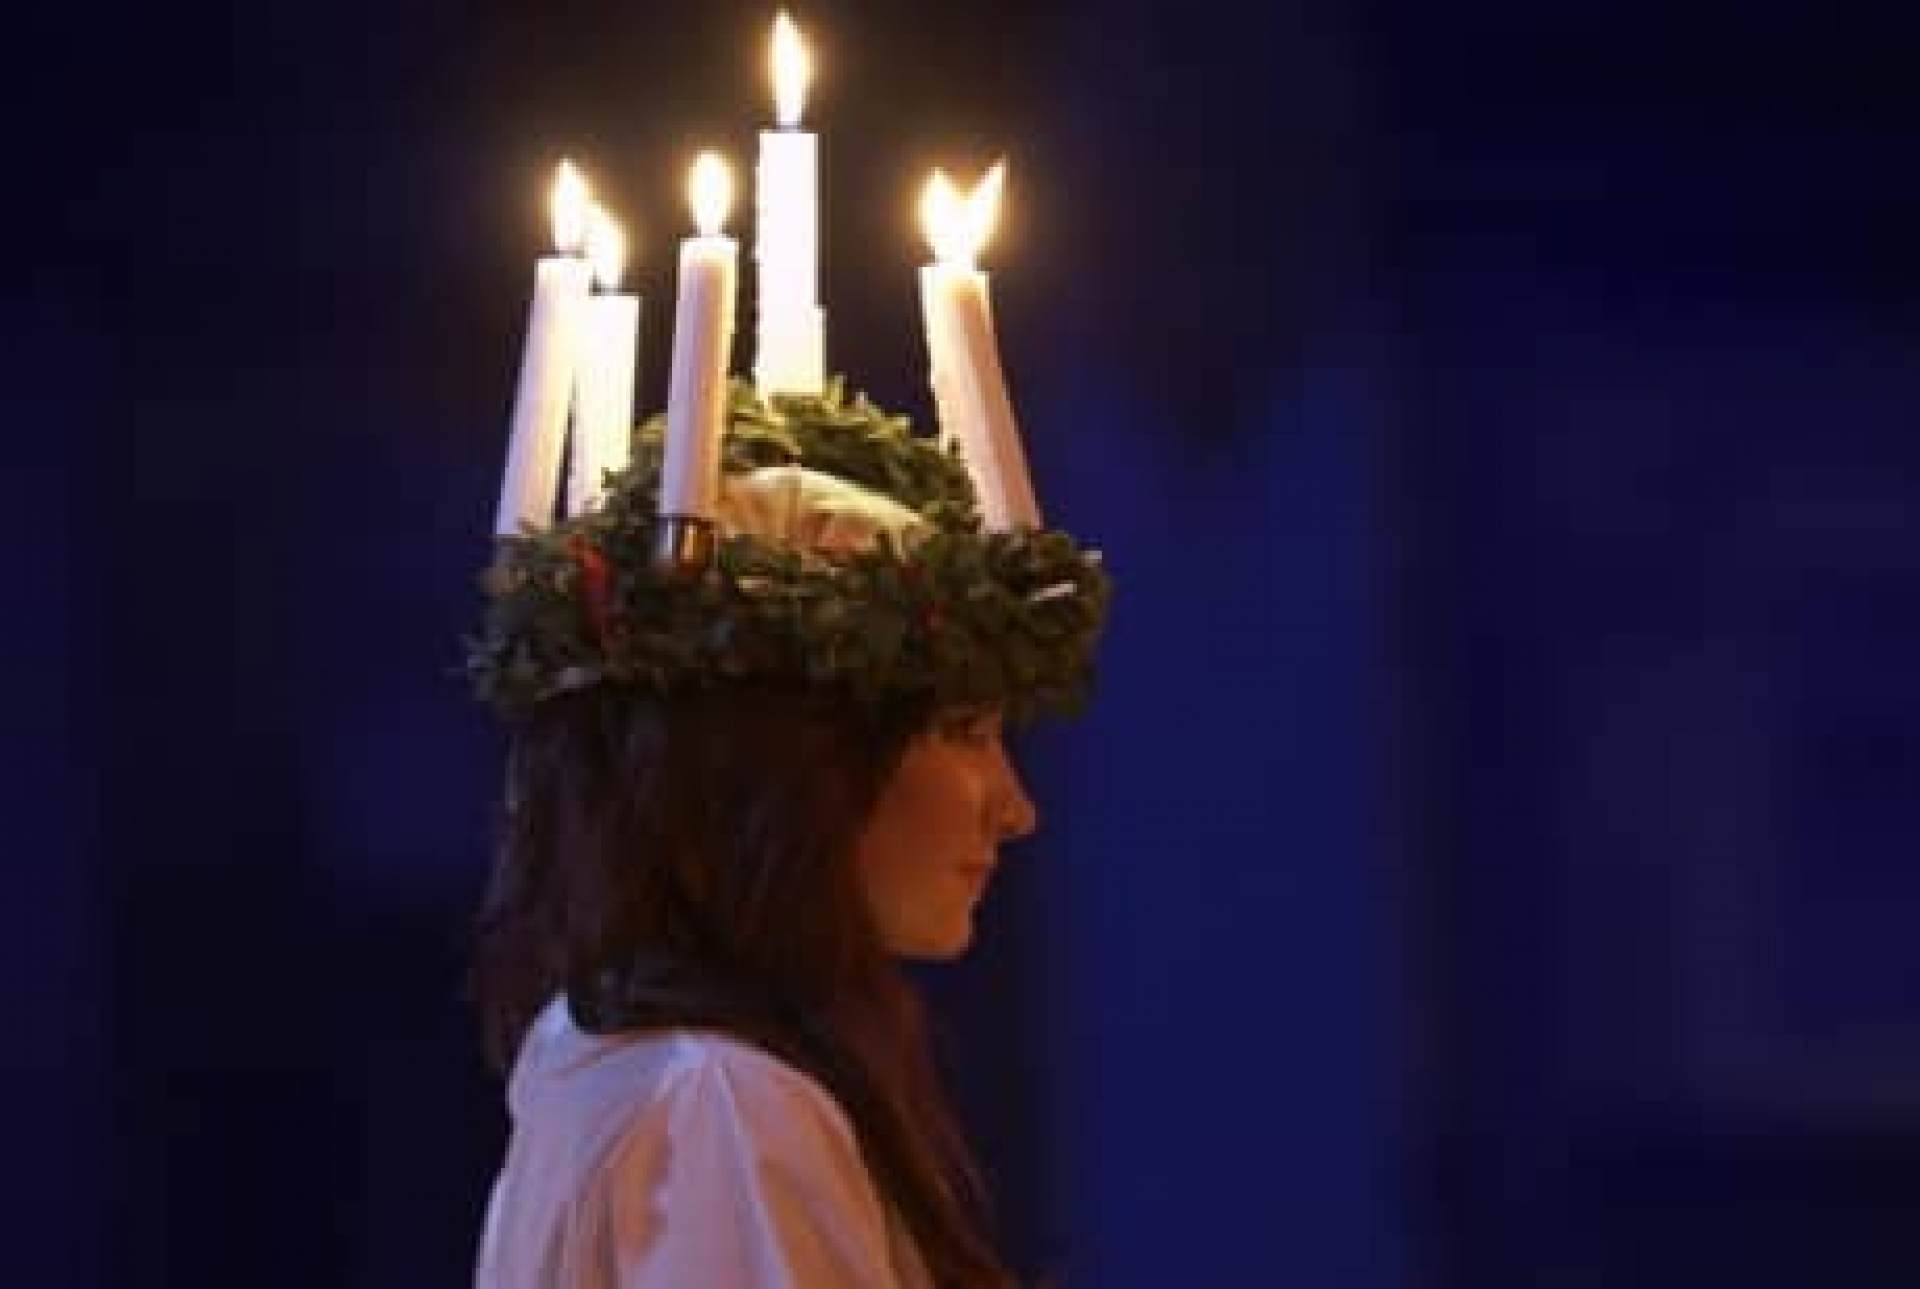 Lucia, Lights and Songs at St. Stephen’s Cathedral